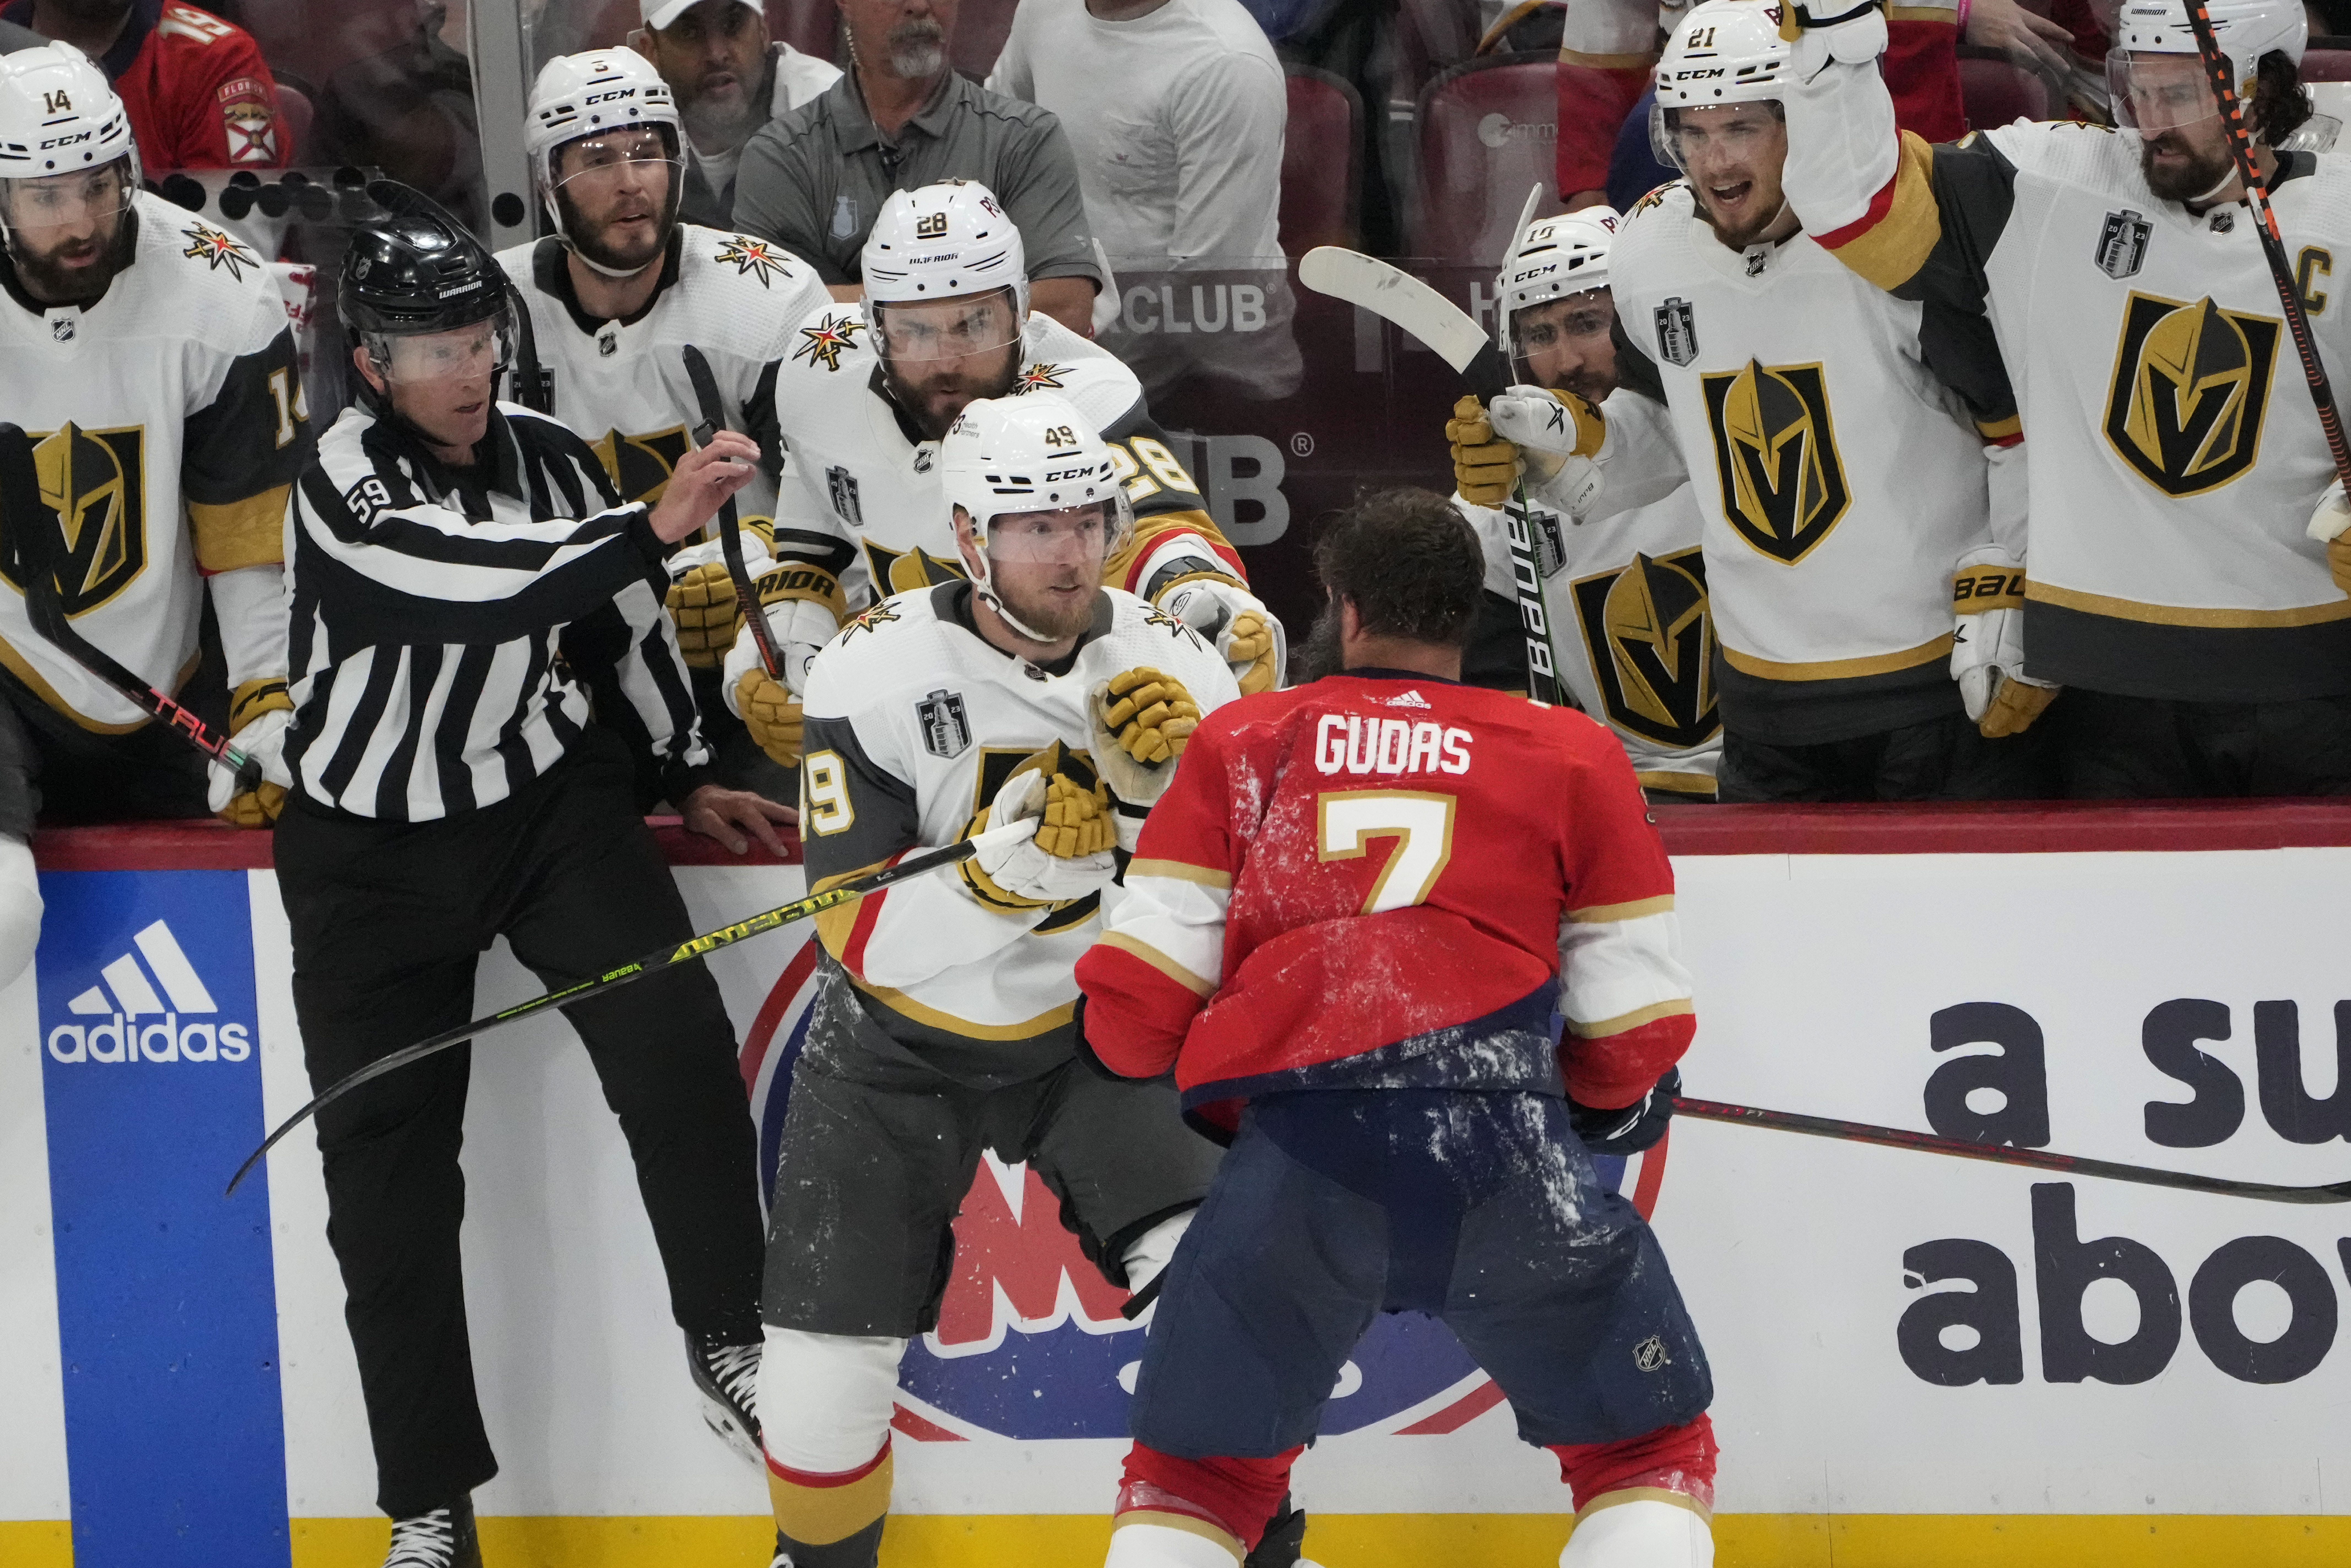 Florida Panthers vs. Vegas Golden Knights TV schedule: How to